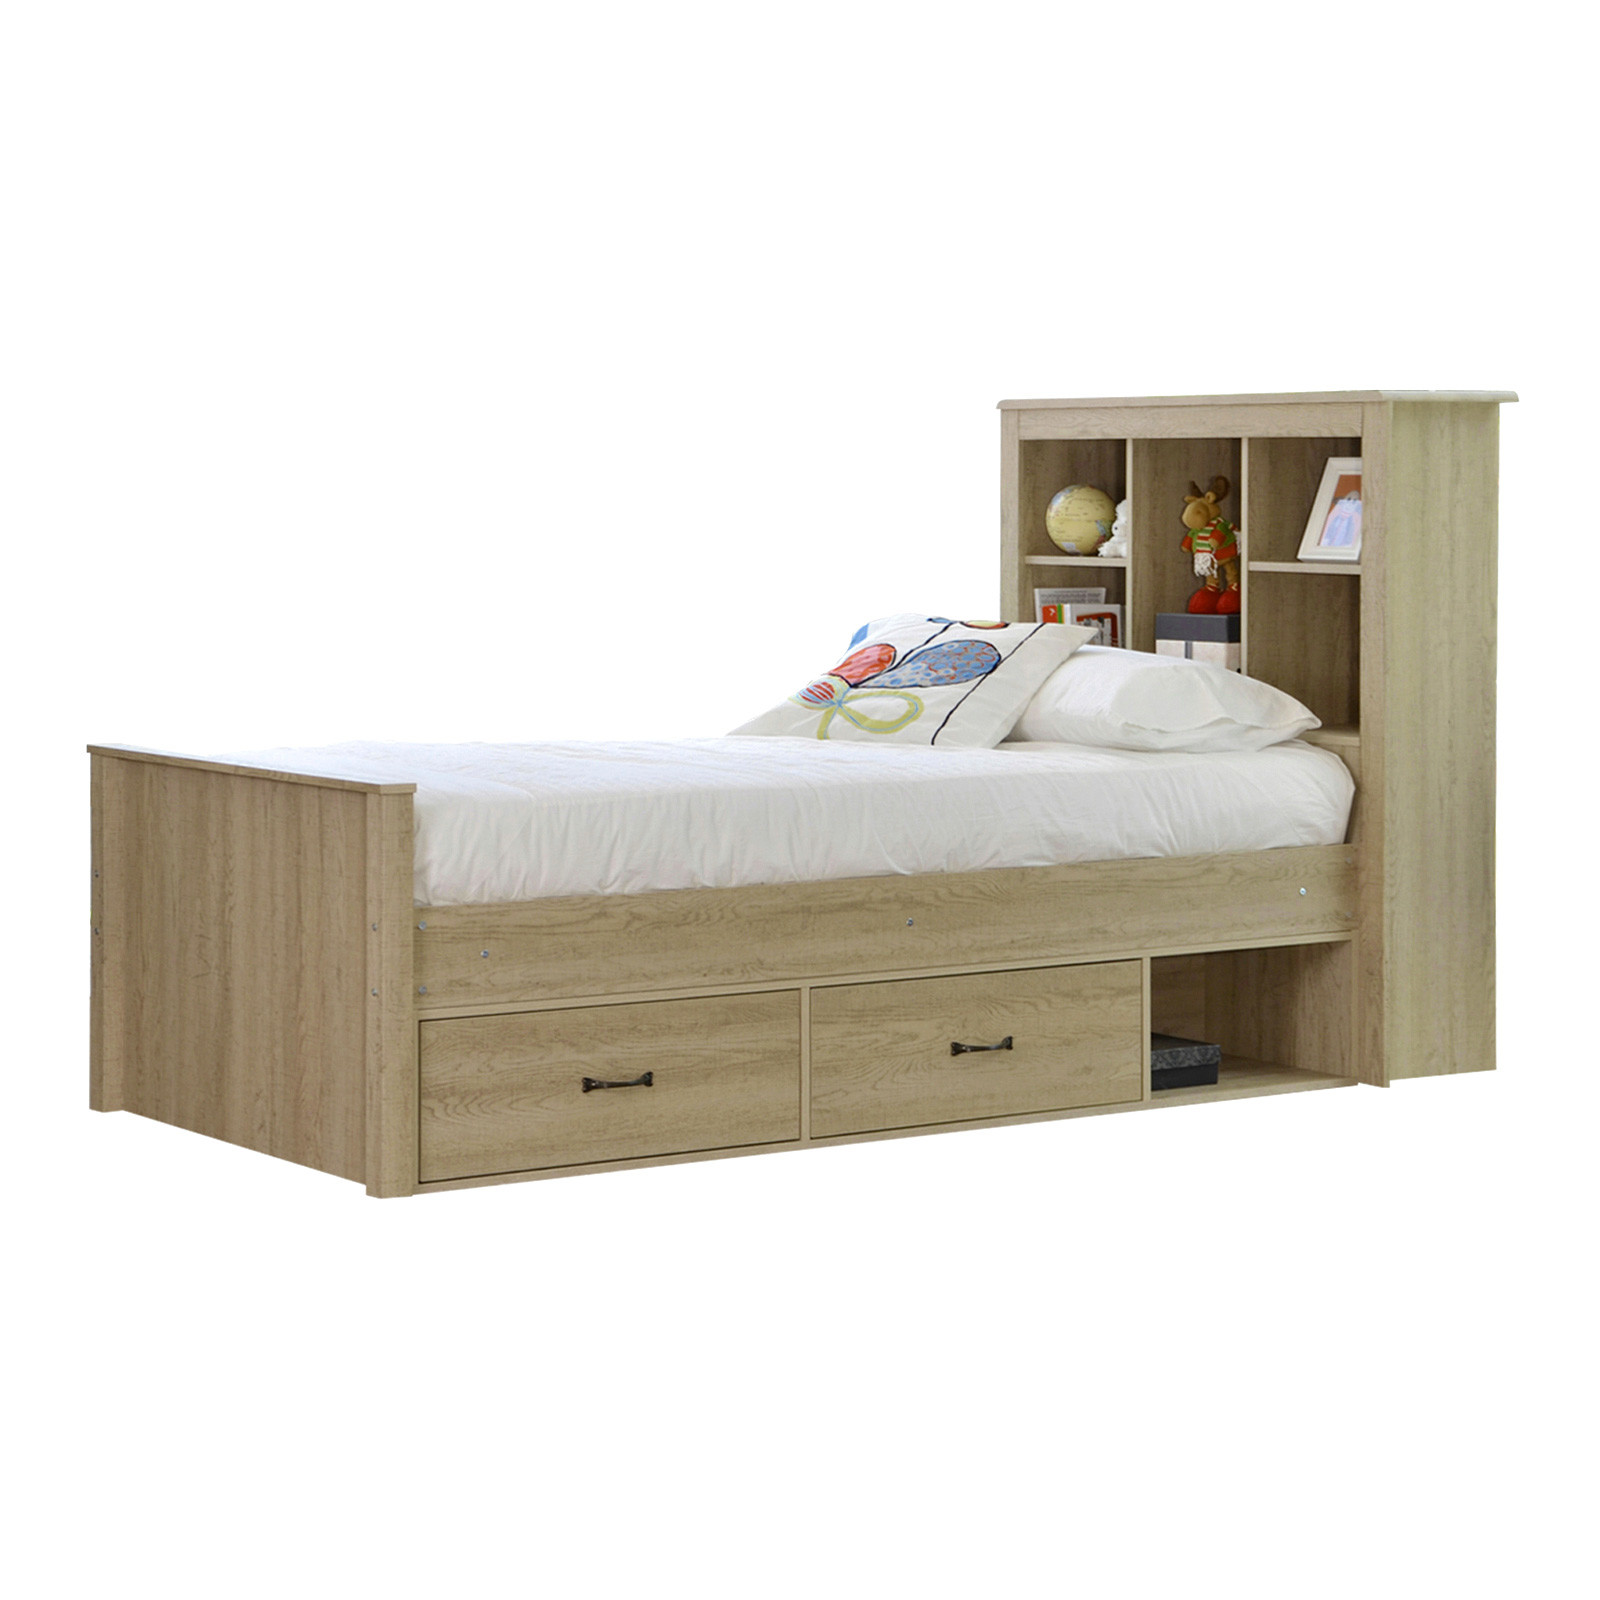 New Jeppe Oak King Single Bed With Bookshelves Drawers Vic